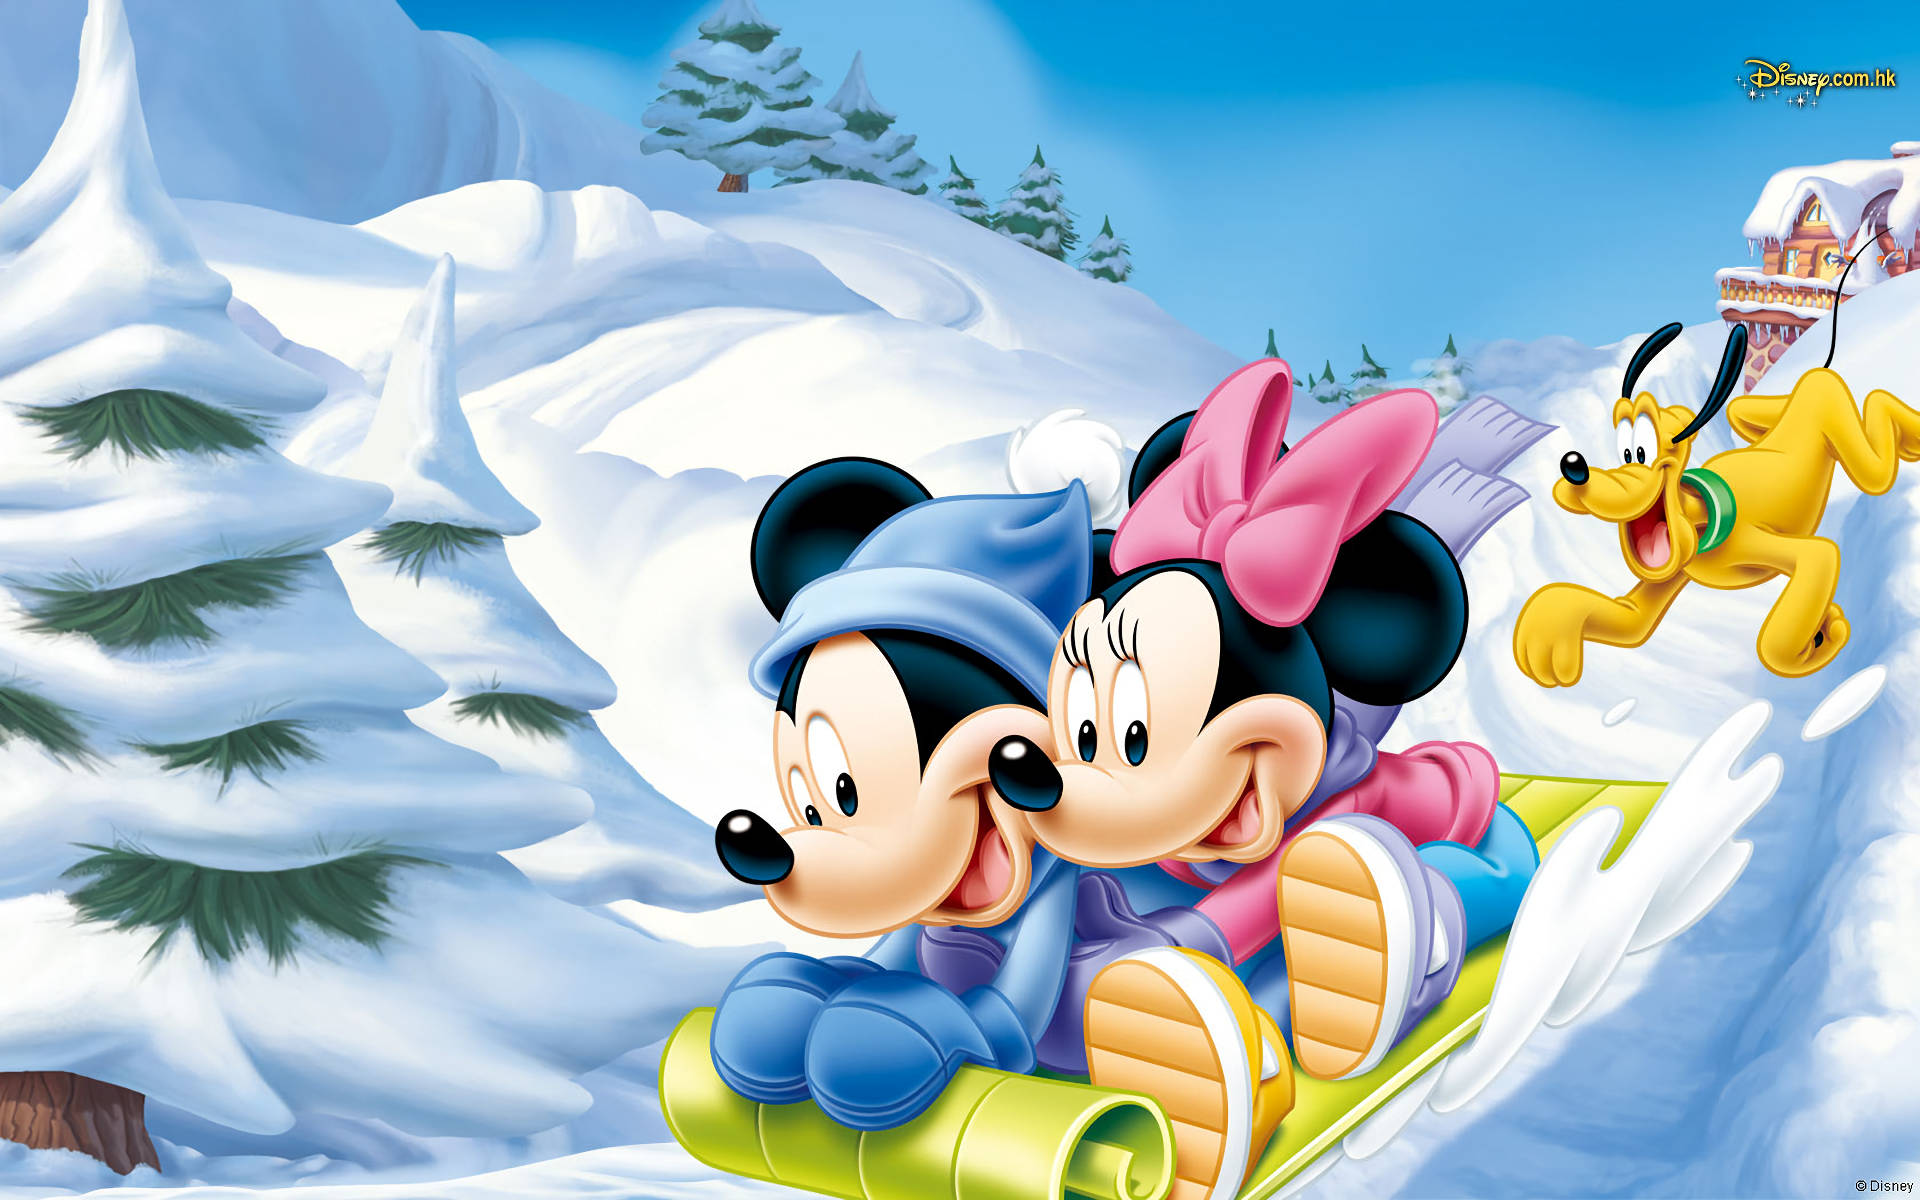 Disney Characters In Snow Background